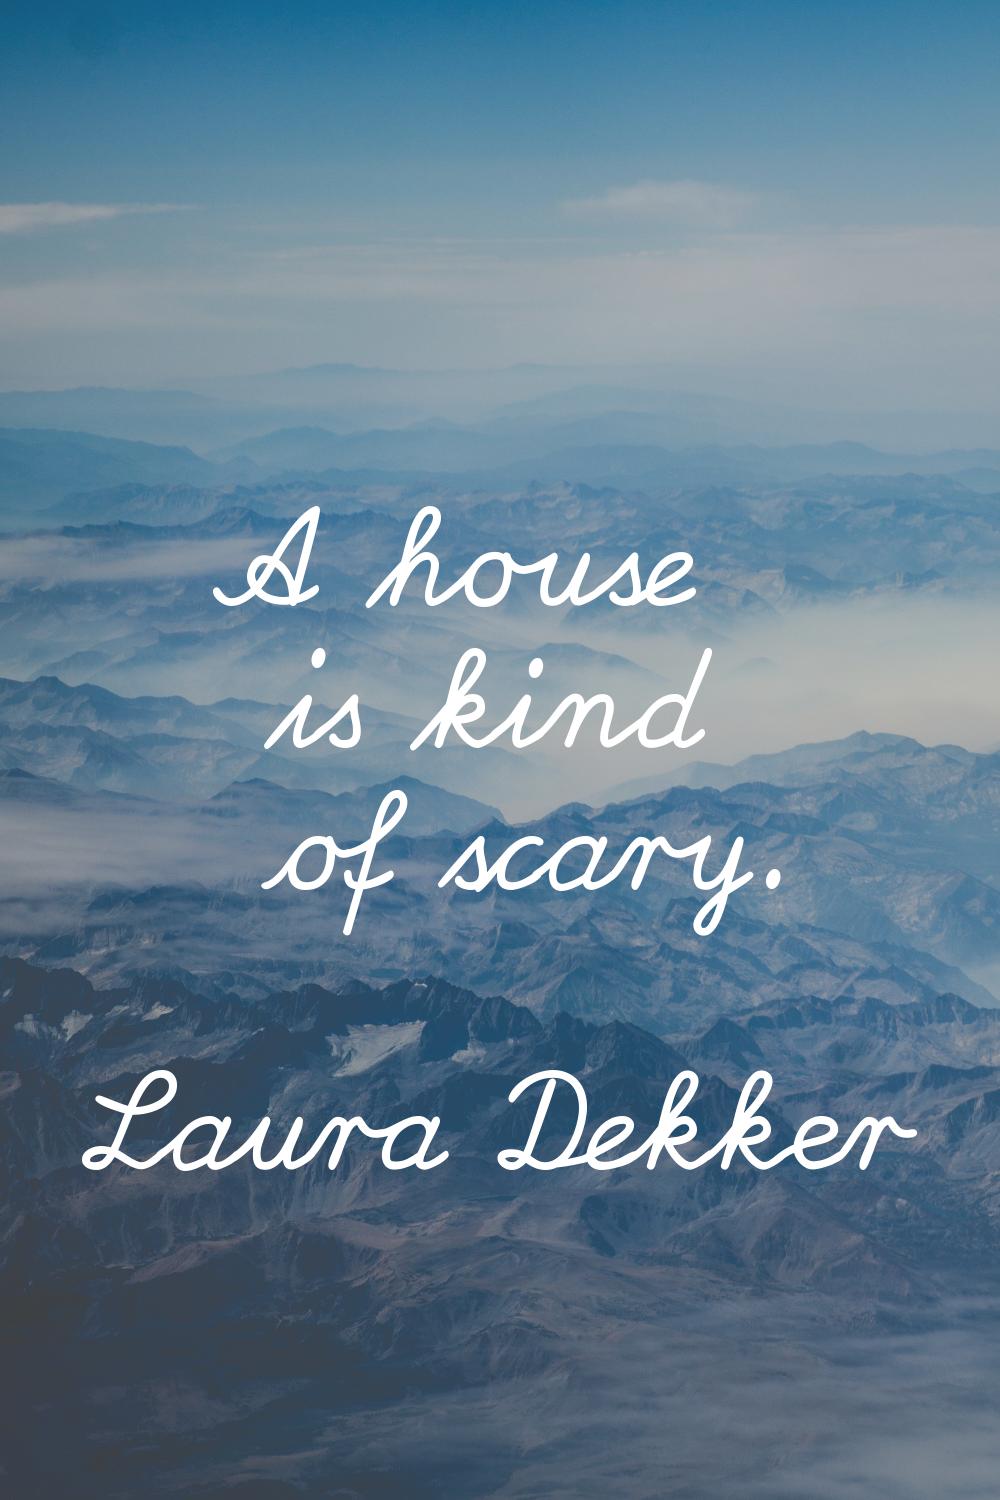 A house is kind of scary.